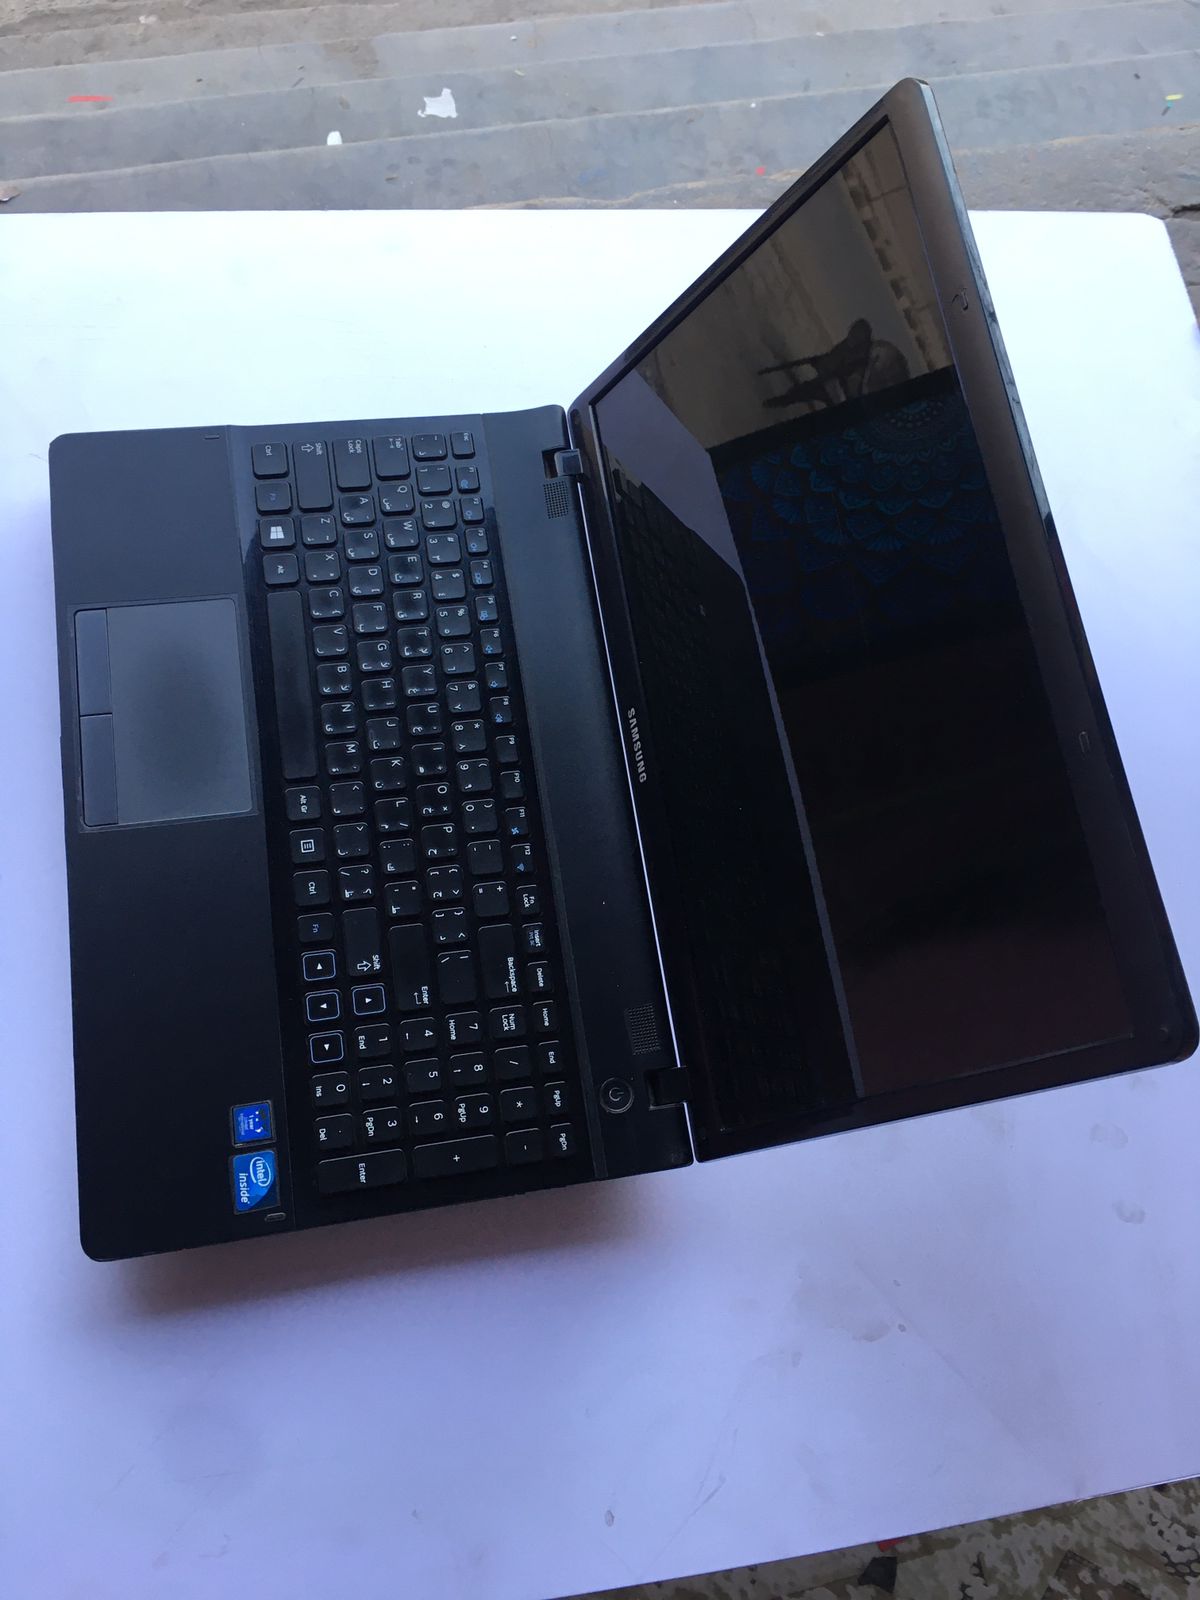 SAMSUNG LAPTOP WITH BLACK CARBON